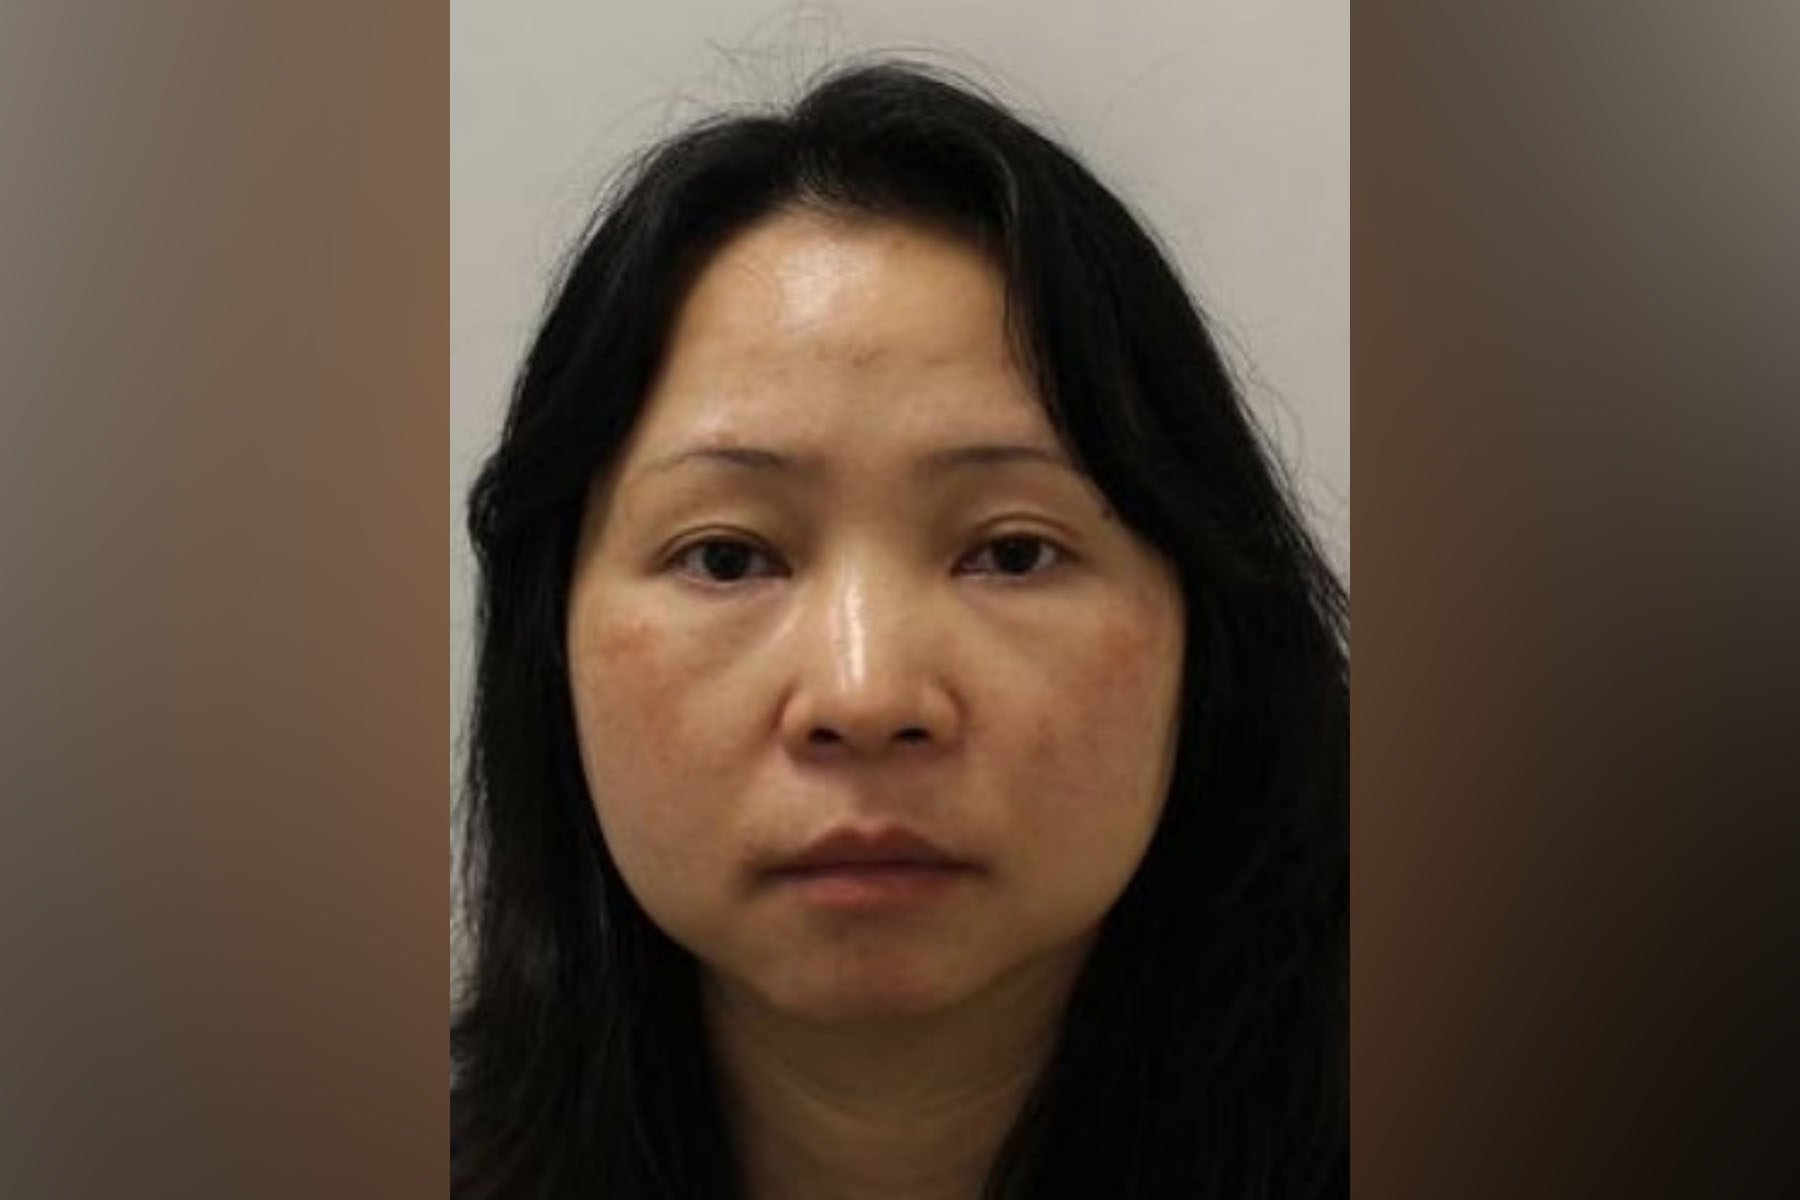 Wen Jian was not alleged to have been involved in the underlying fraud, in which money was stolen from 130,000 Chinese investors. Photo: Crown Prosecution Service